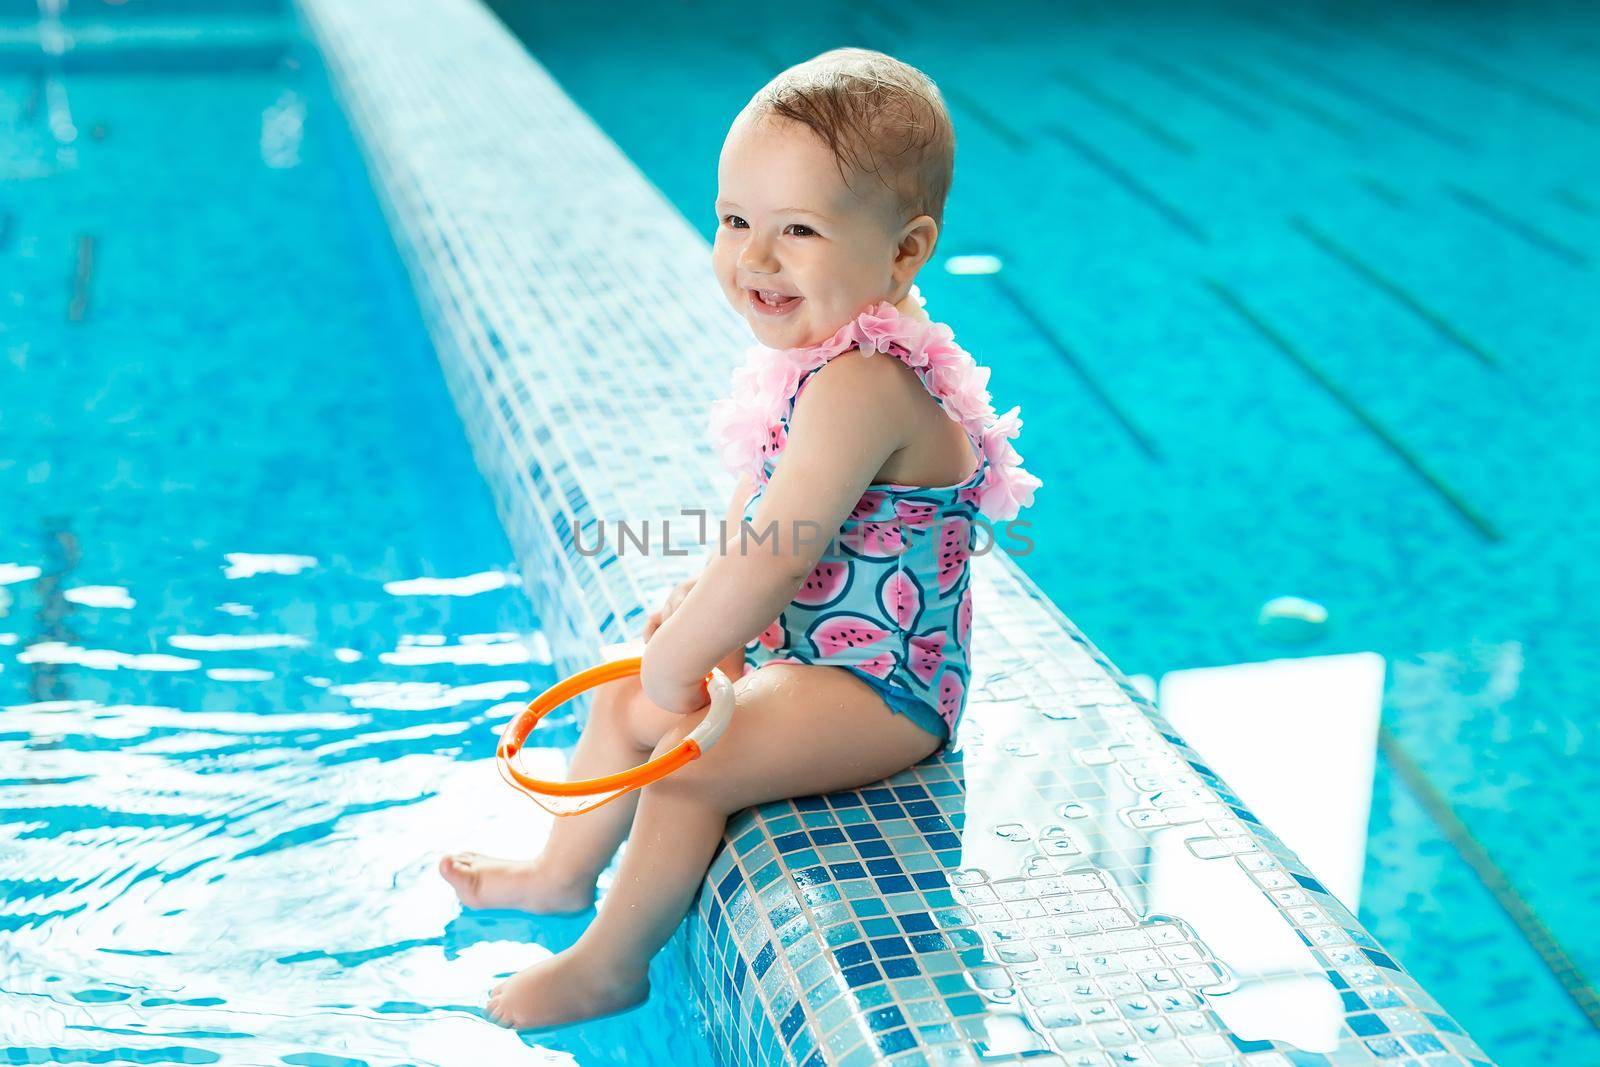 Little girl is laughing in the pool at a swimming lesson.